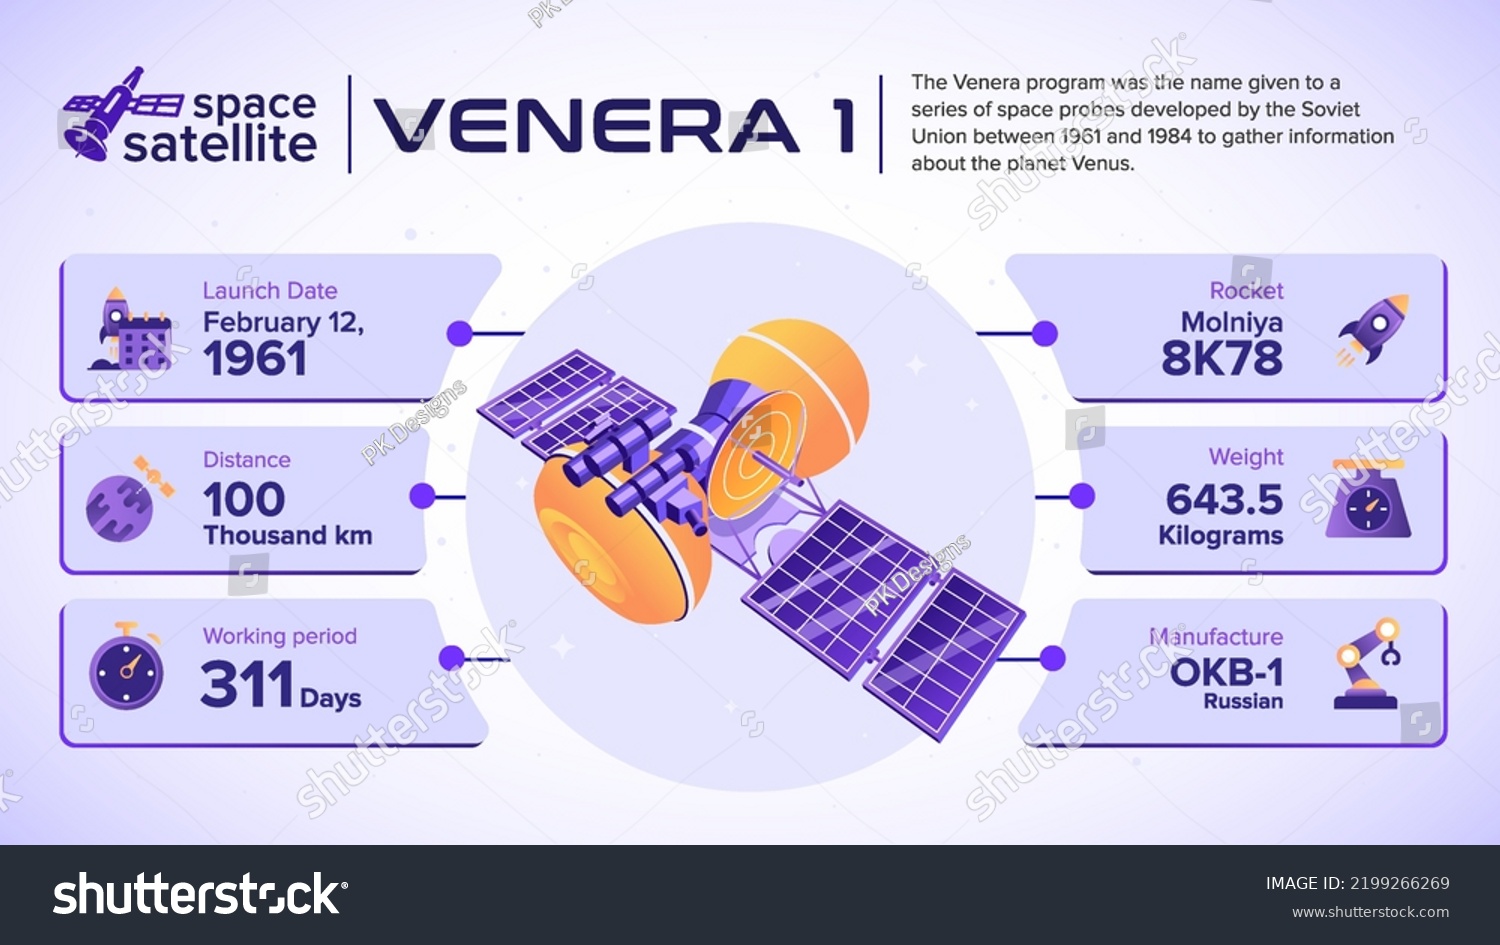 Space Satellites Venera Facts and information -vector illustration #2199266269